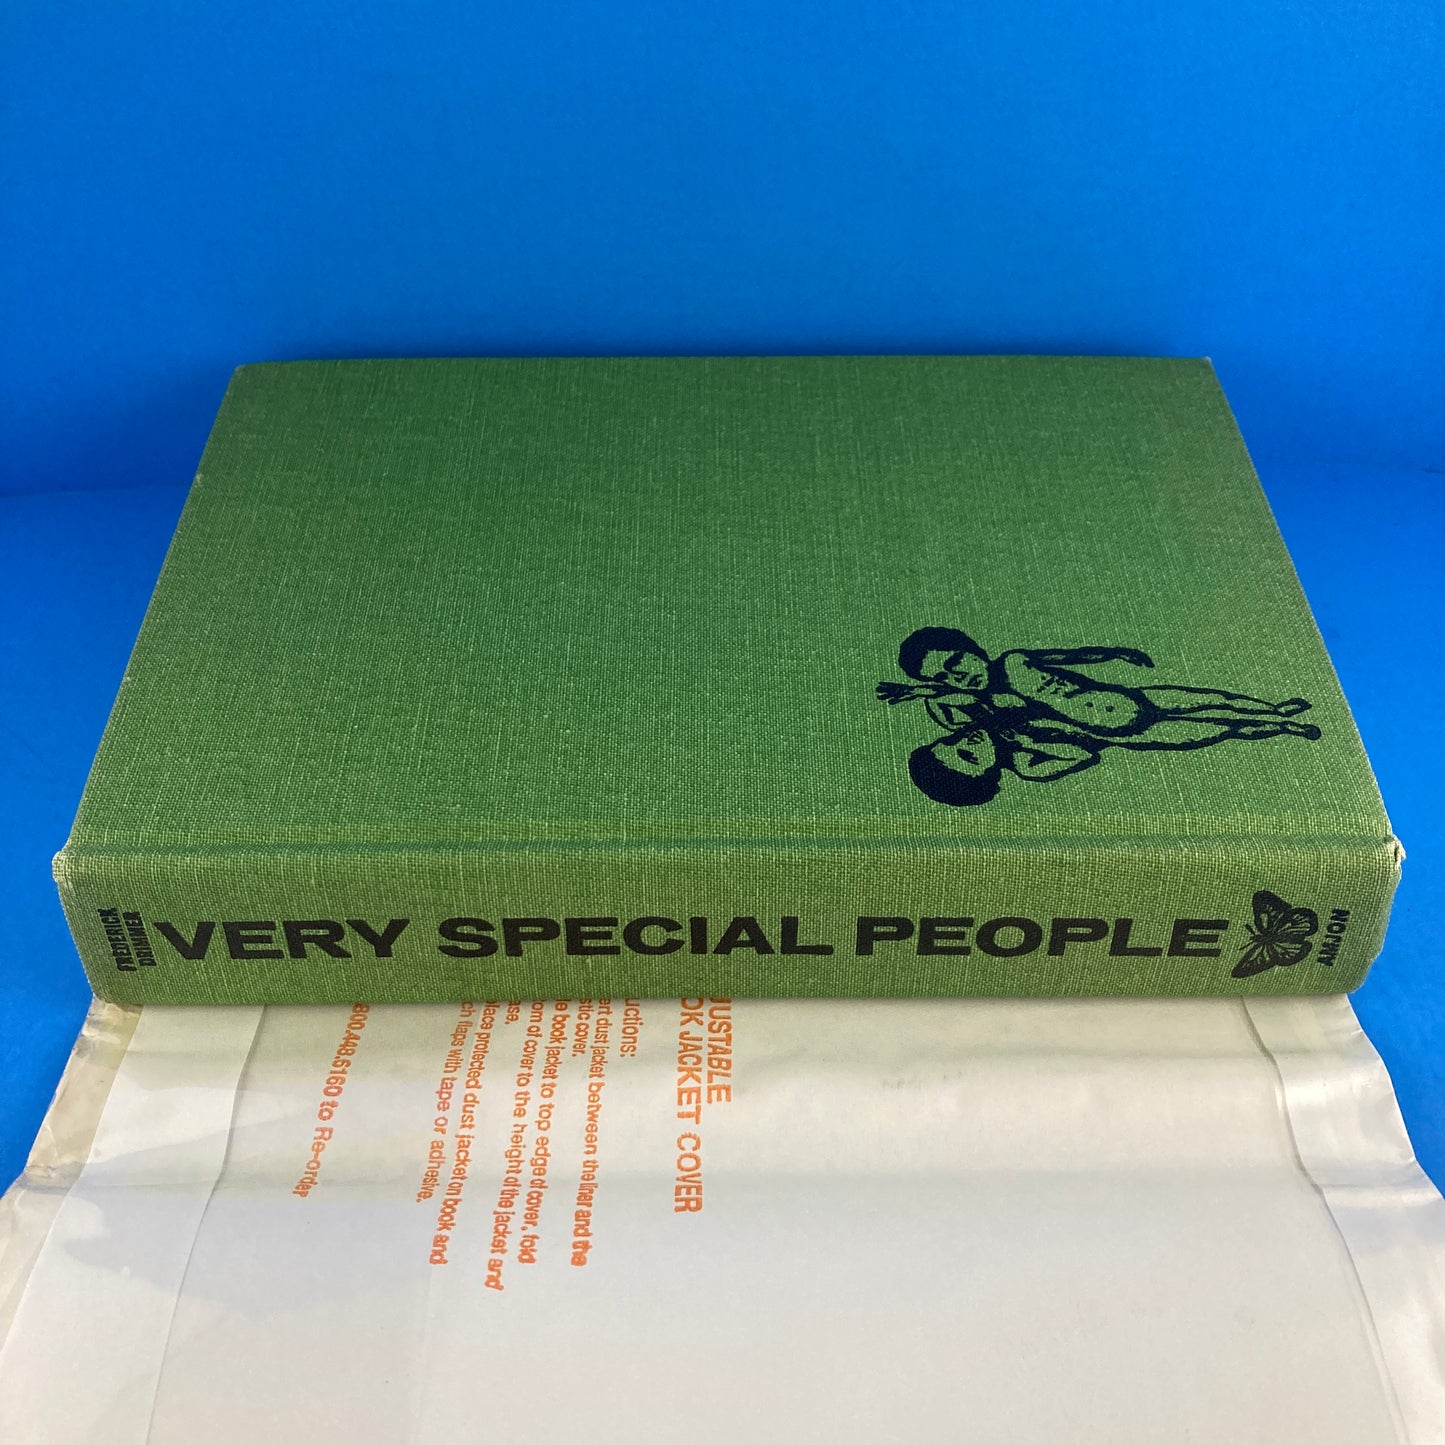 Very Special People: The Struggles, Loves, and Triumphs of Human Oddities